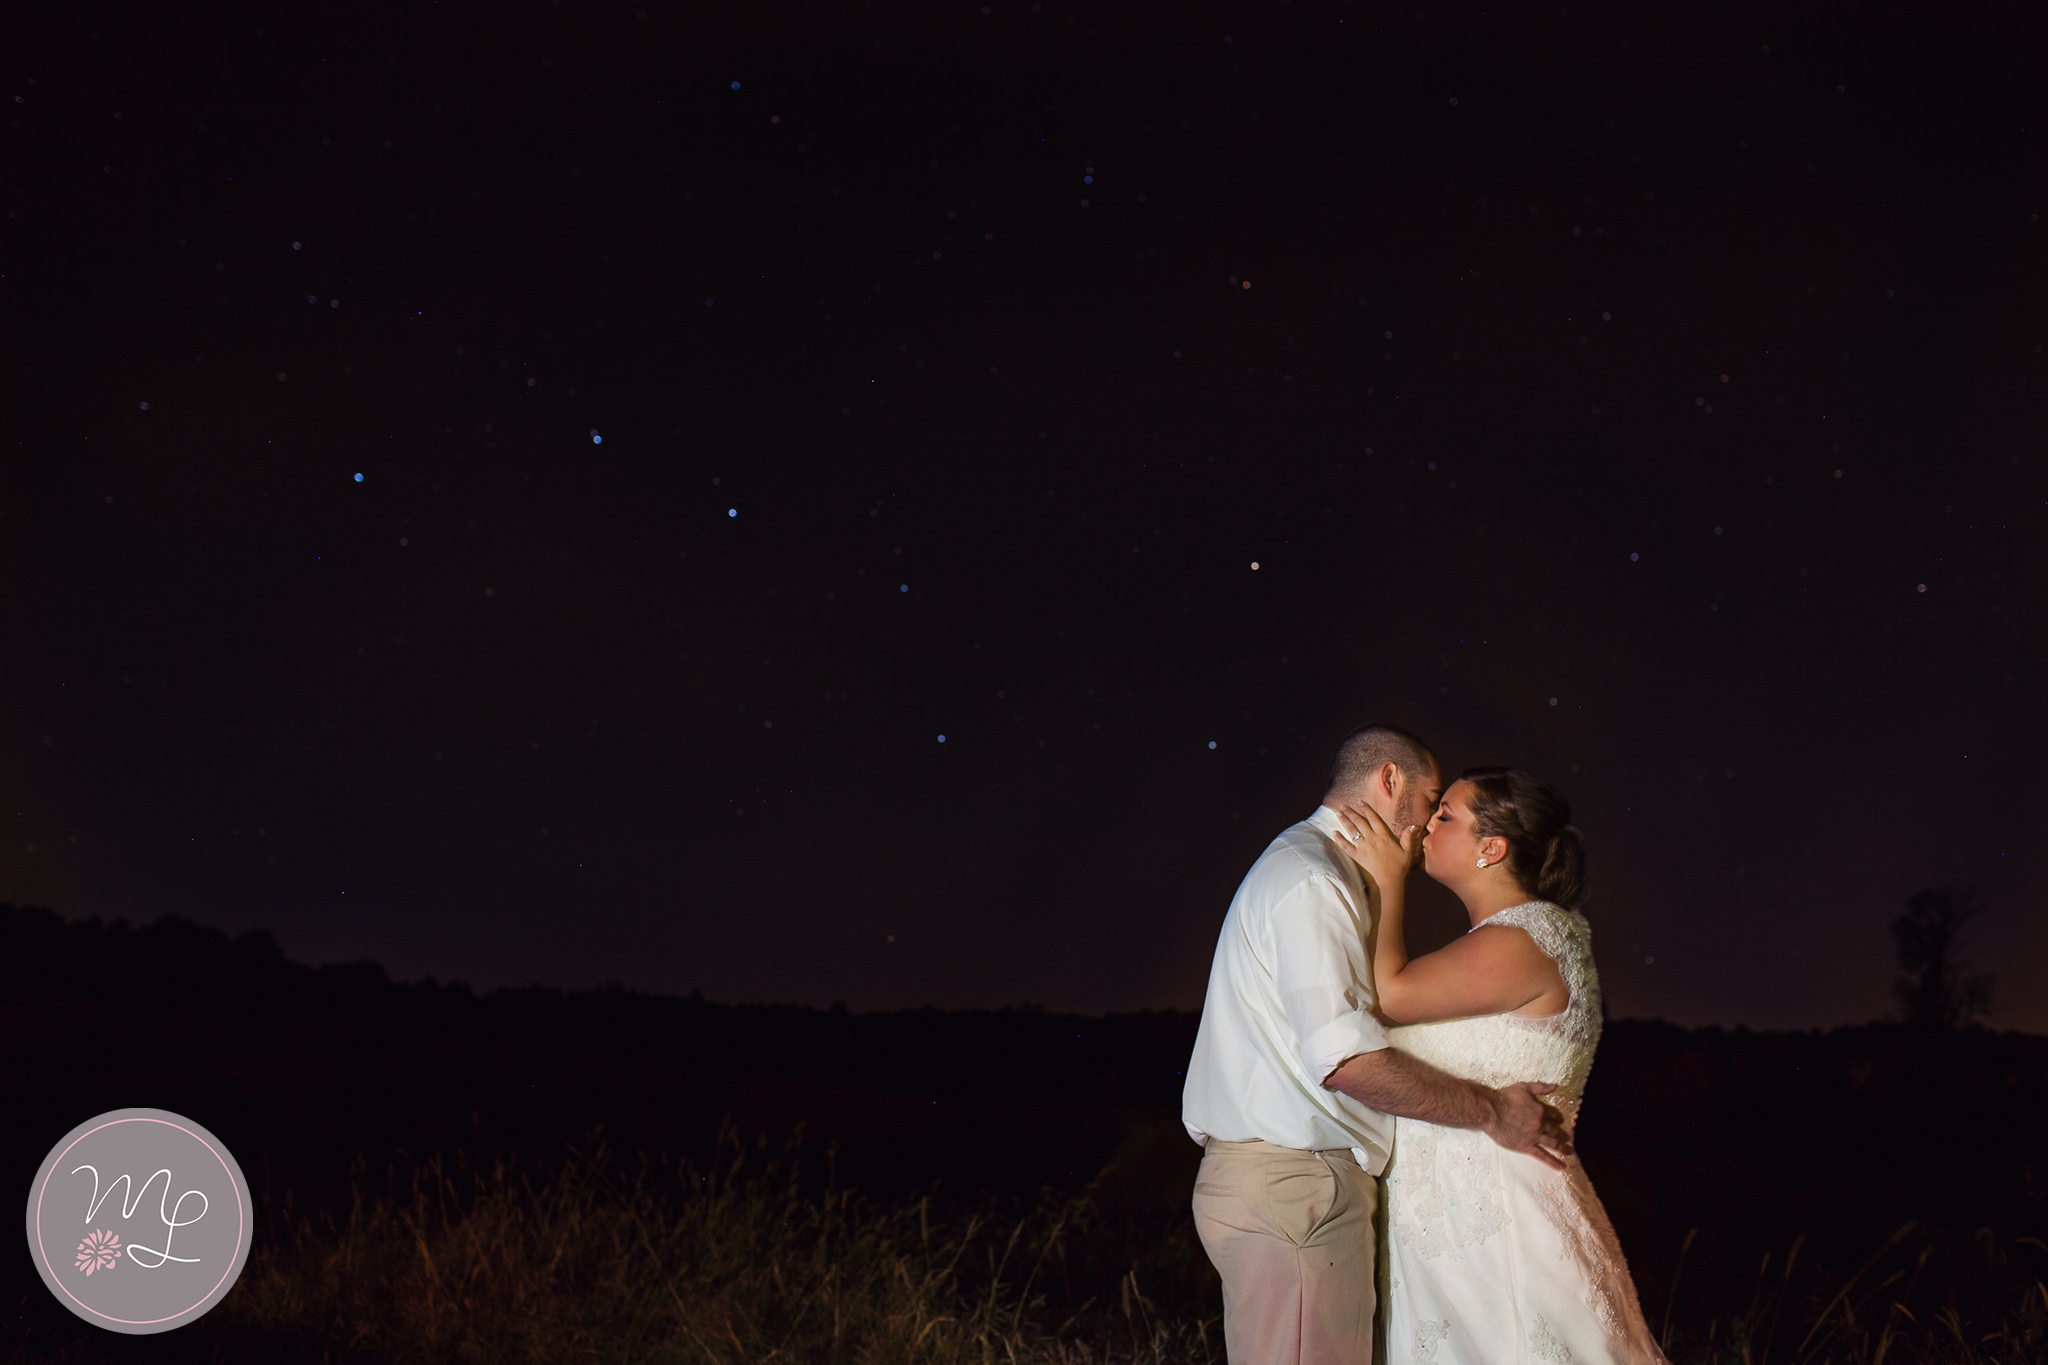 The big dipper looked over Chris & Lindsey's shoulder as they shared a wedding kiss! Photo by Mabyn Ludke Photography